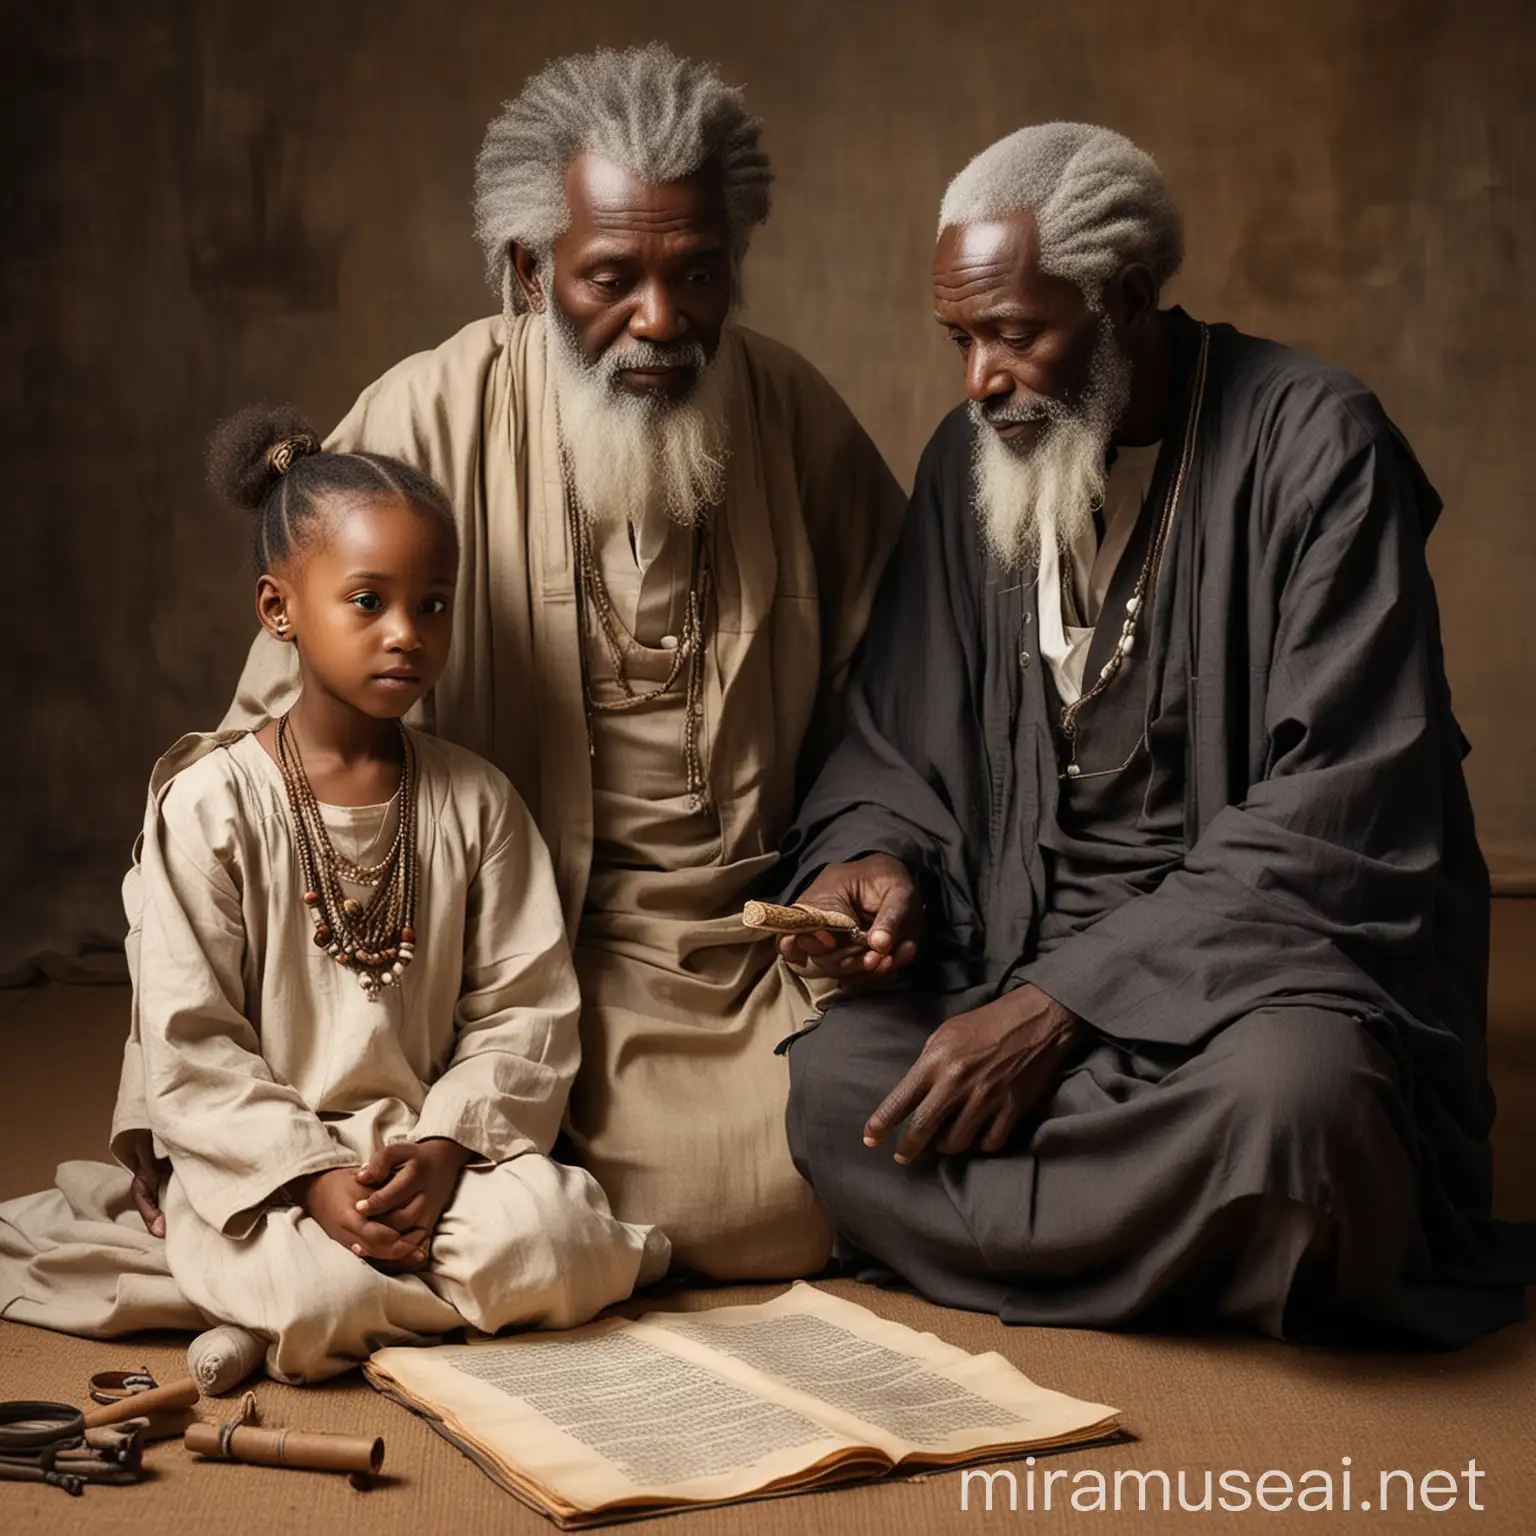 An old African  sage wearing long garments sitting with his black granddaughter,  little african girl has hair, old man with greying beards, Africans, studying the old scrolls